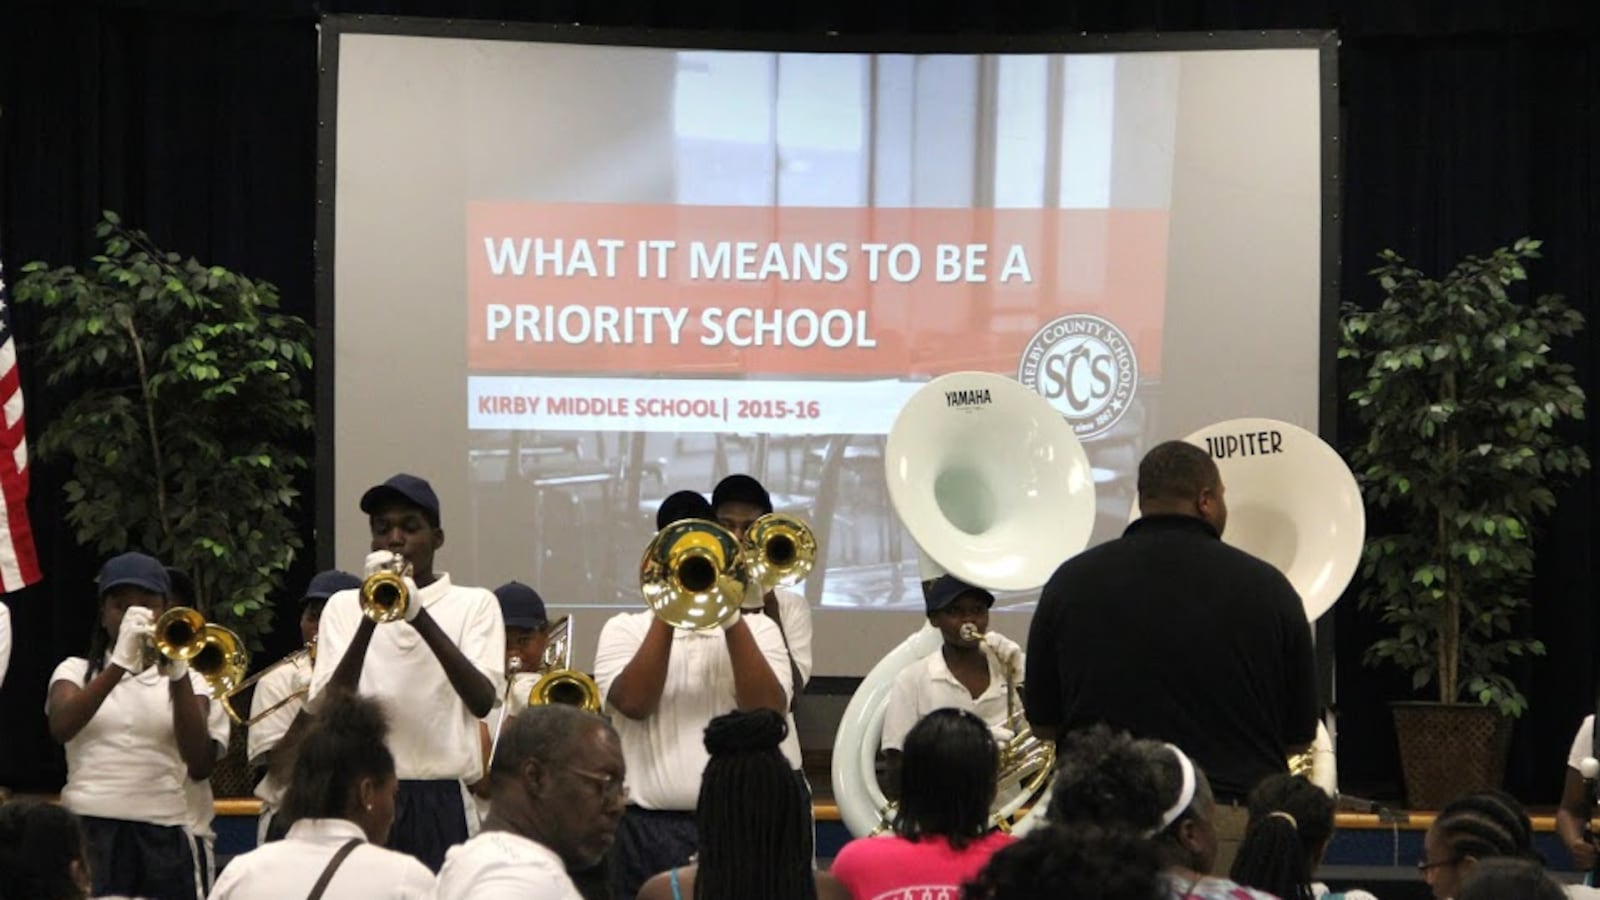 Kirby Middle School parents, students and supporters learn what it means to be a priority school, including eligibility to be removed by the state from local district control, during a community meeting organized in August by Shelby County Schools.